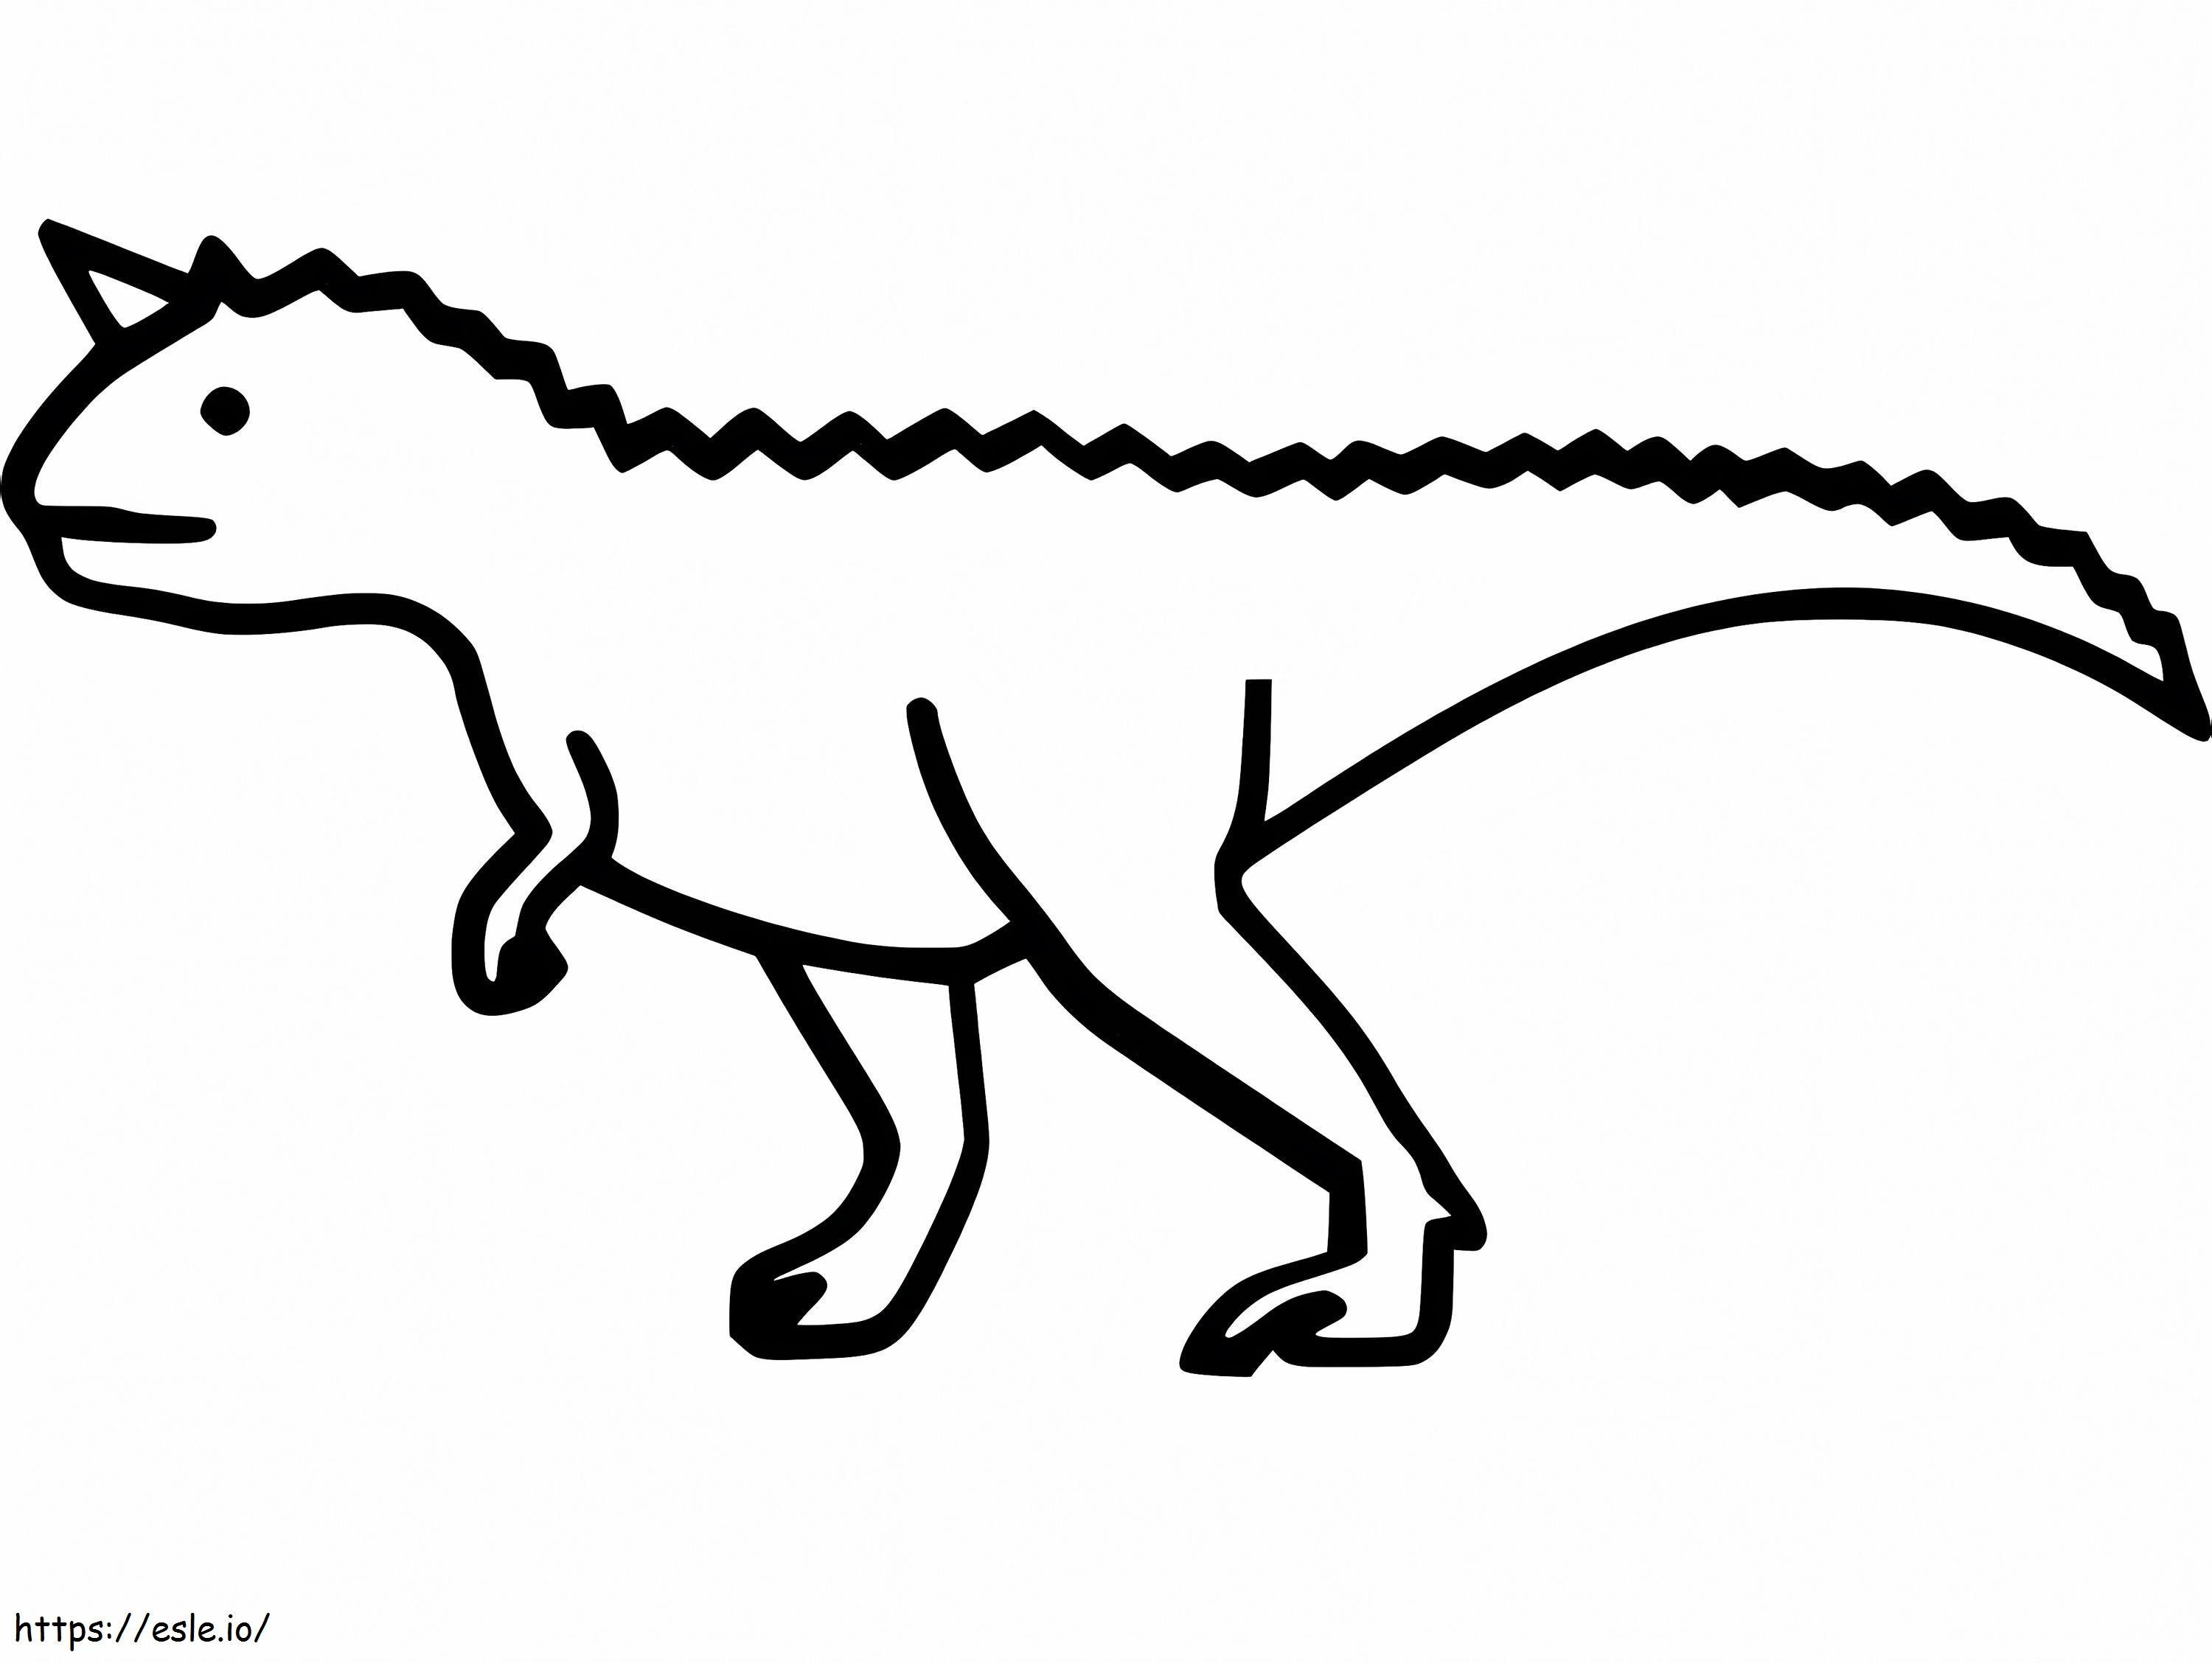 Simple Carnotaurus coloring page